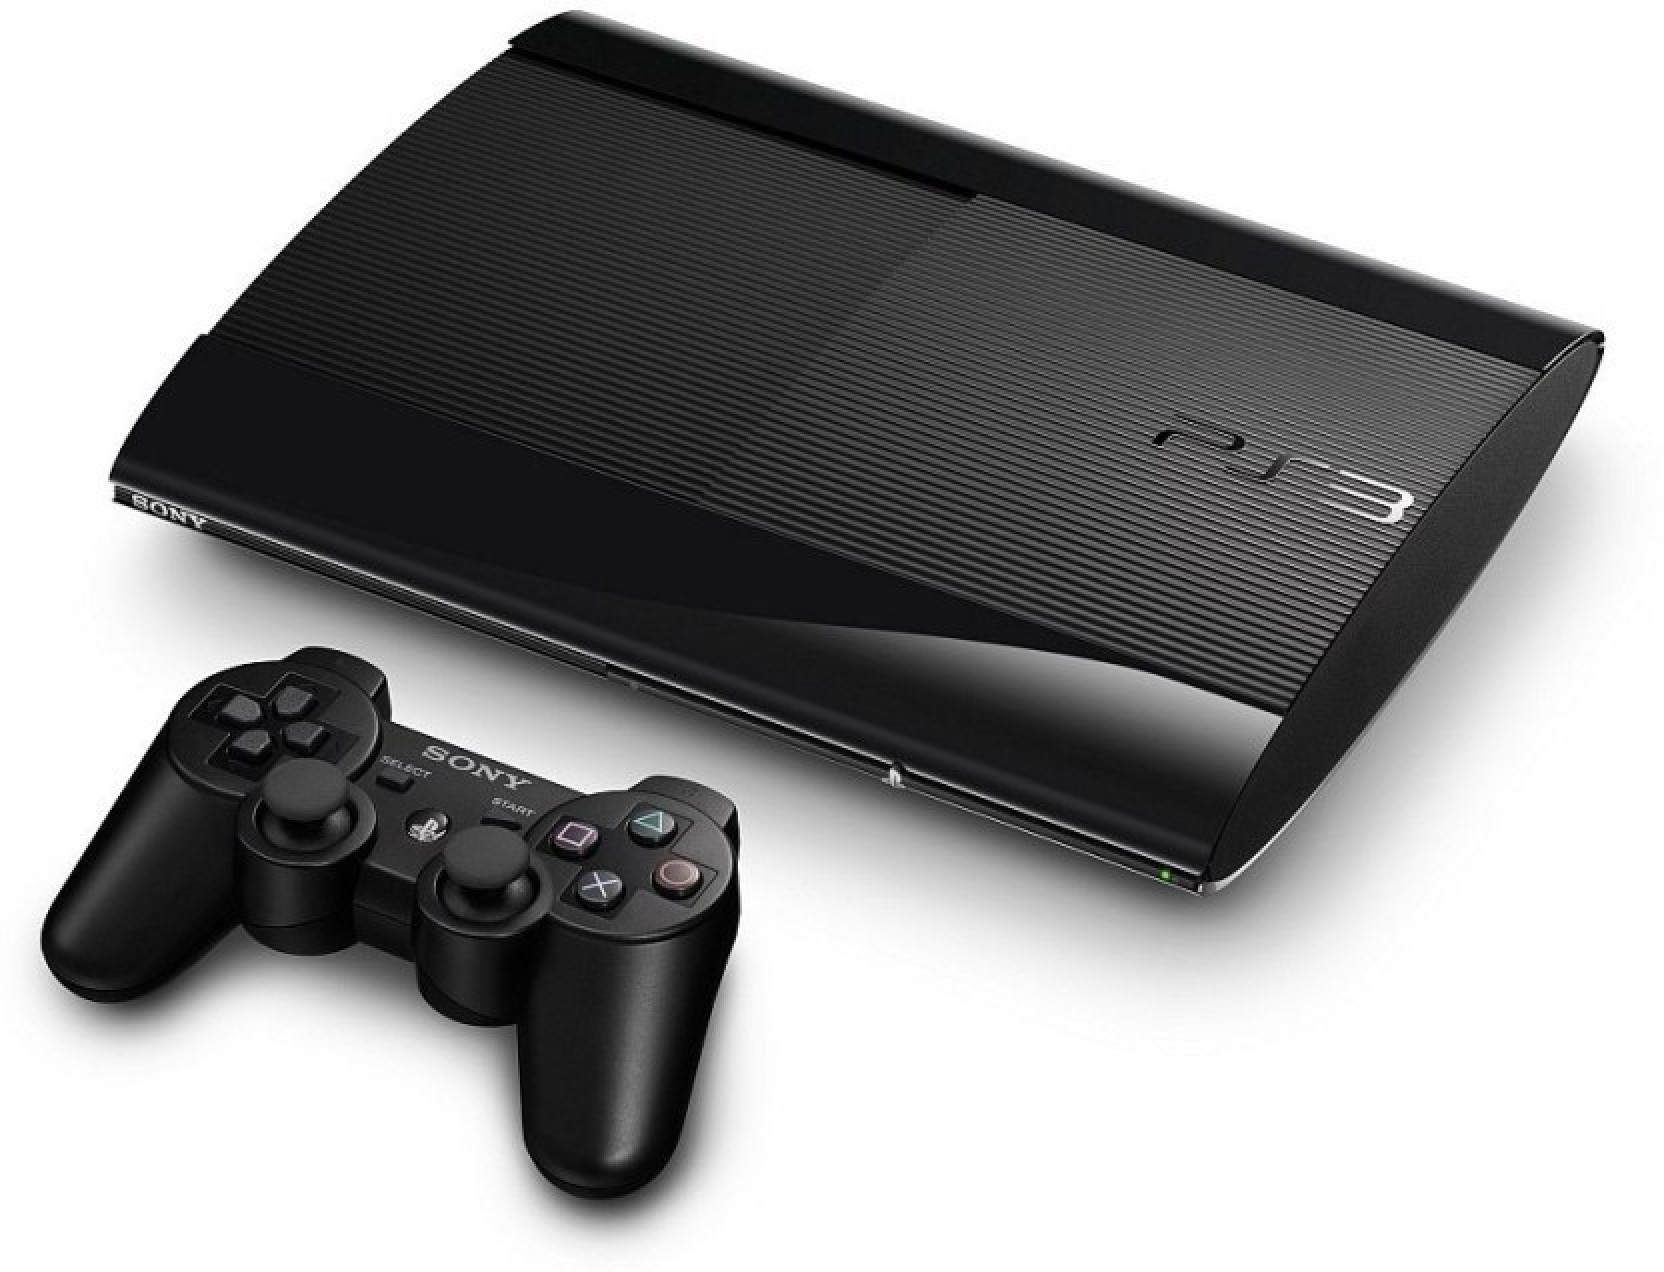 Sony PlayStation 3 (PS3) 12 GB Price in India - Buy Sony PlayStation 3